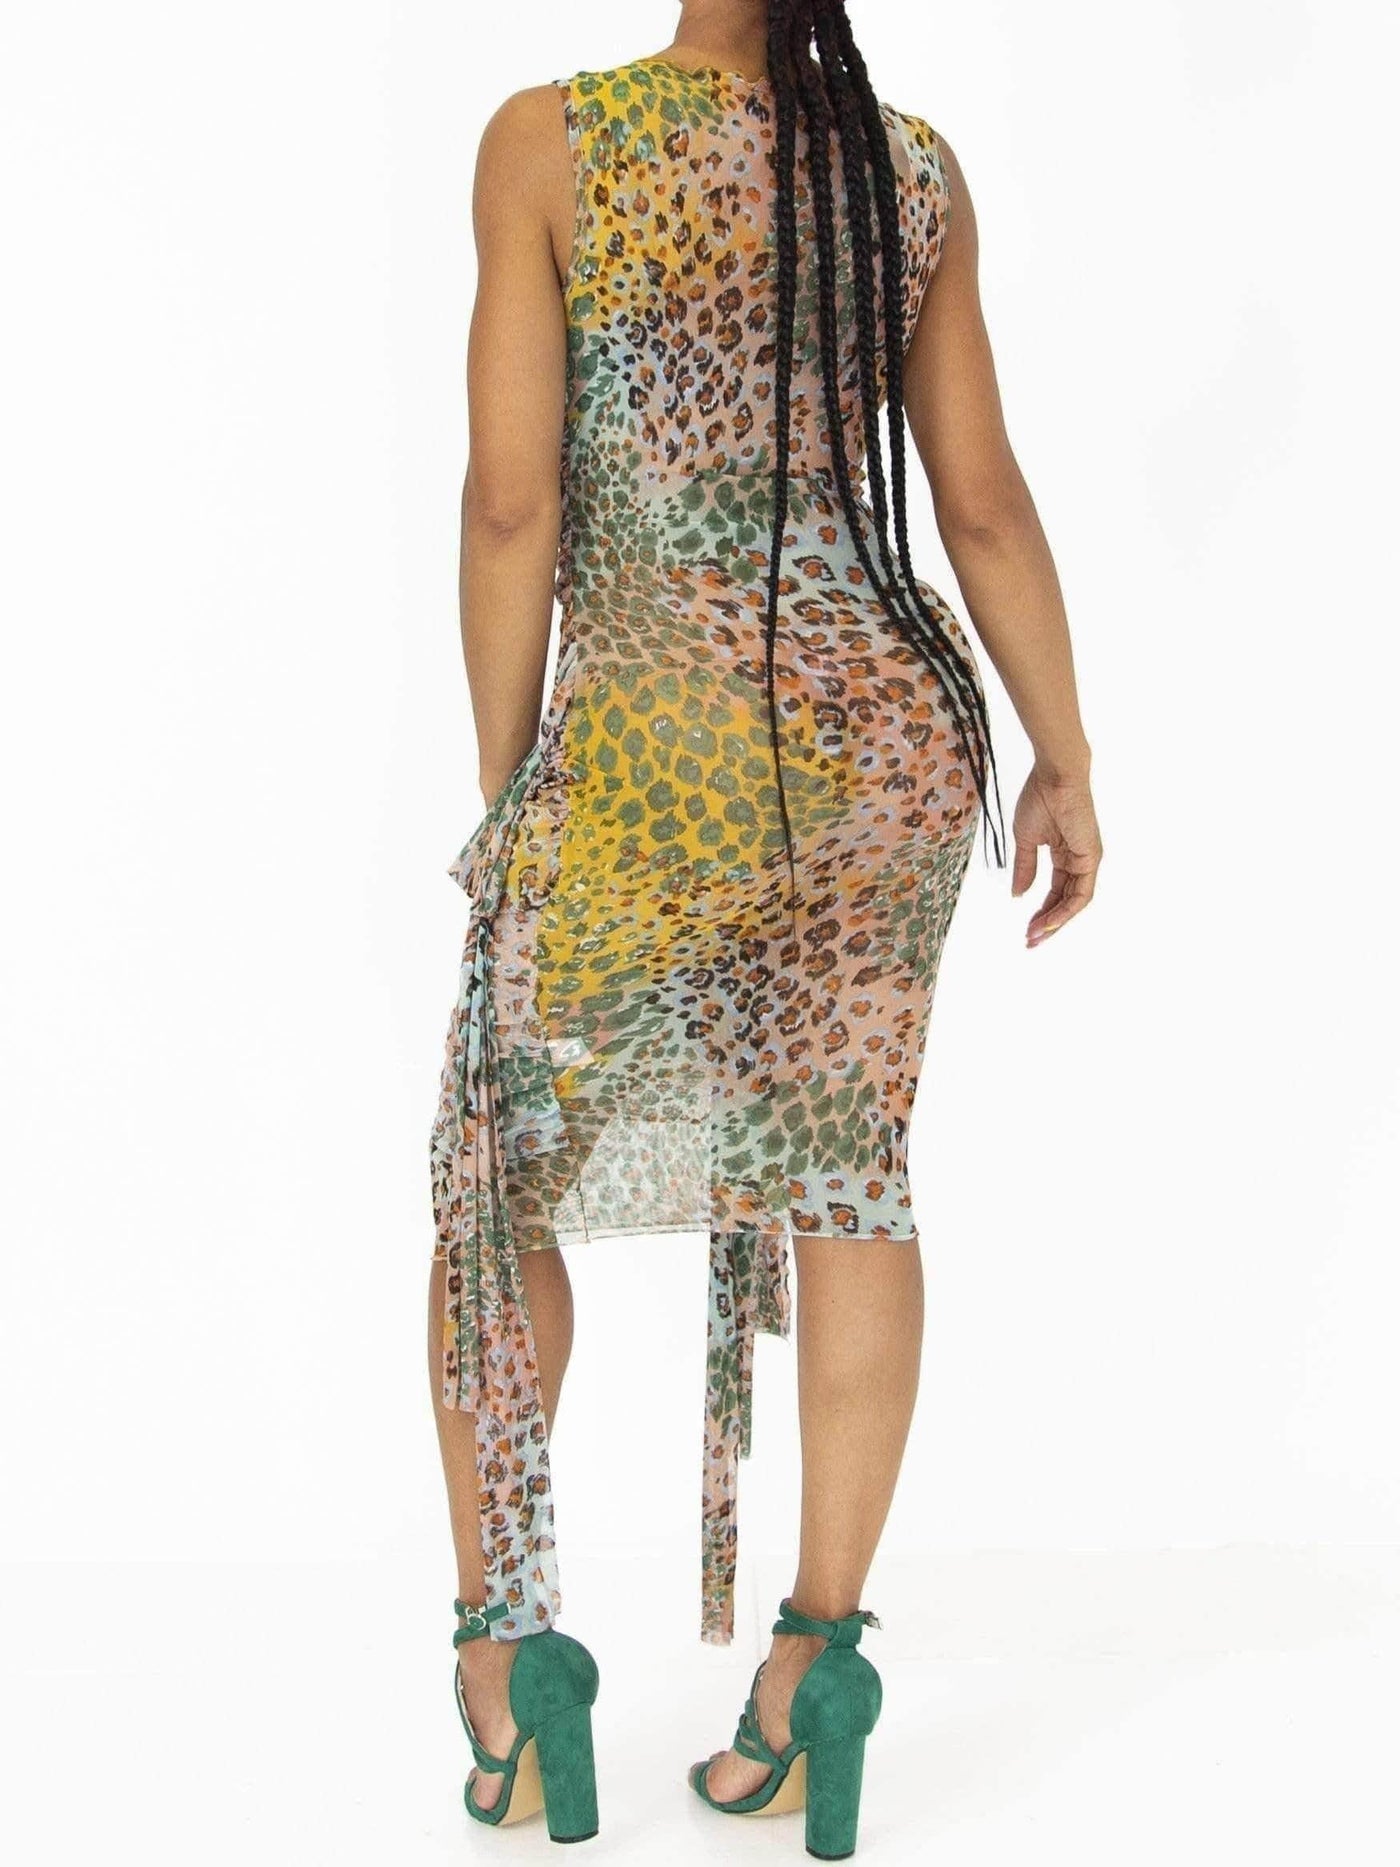 Print Me Green | Strappy Mesh Midi Dress - Statement Piece NY _tab_size-chart, animal print, Blossom 2021, Brooklyn Boutique, chic, dress, Dresses, Green, mesh, mesh cover up dress, Misses, Multi, not clearance, see through mesh dress, sexy mesh dresses, sheer bodycon dress, Ships from USA, Sleeveless, so mesh, SPNY Exclusive, statement, Statement Clothing, statement piece, Statement Piece Boutique, statement piece ny, Statement Pieces, Statement Pieces Boutique, Women's Boutique Statement Dresses